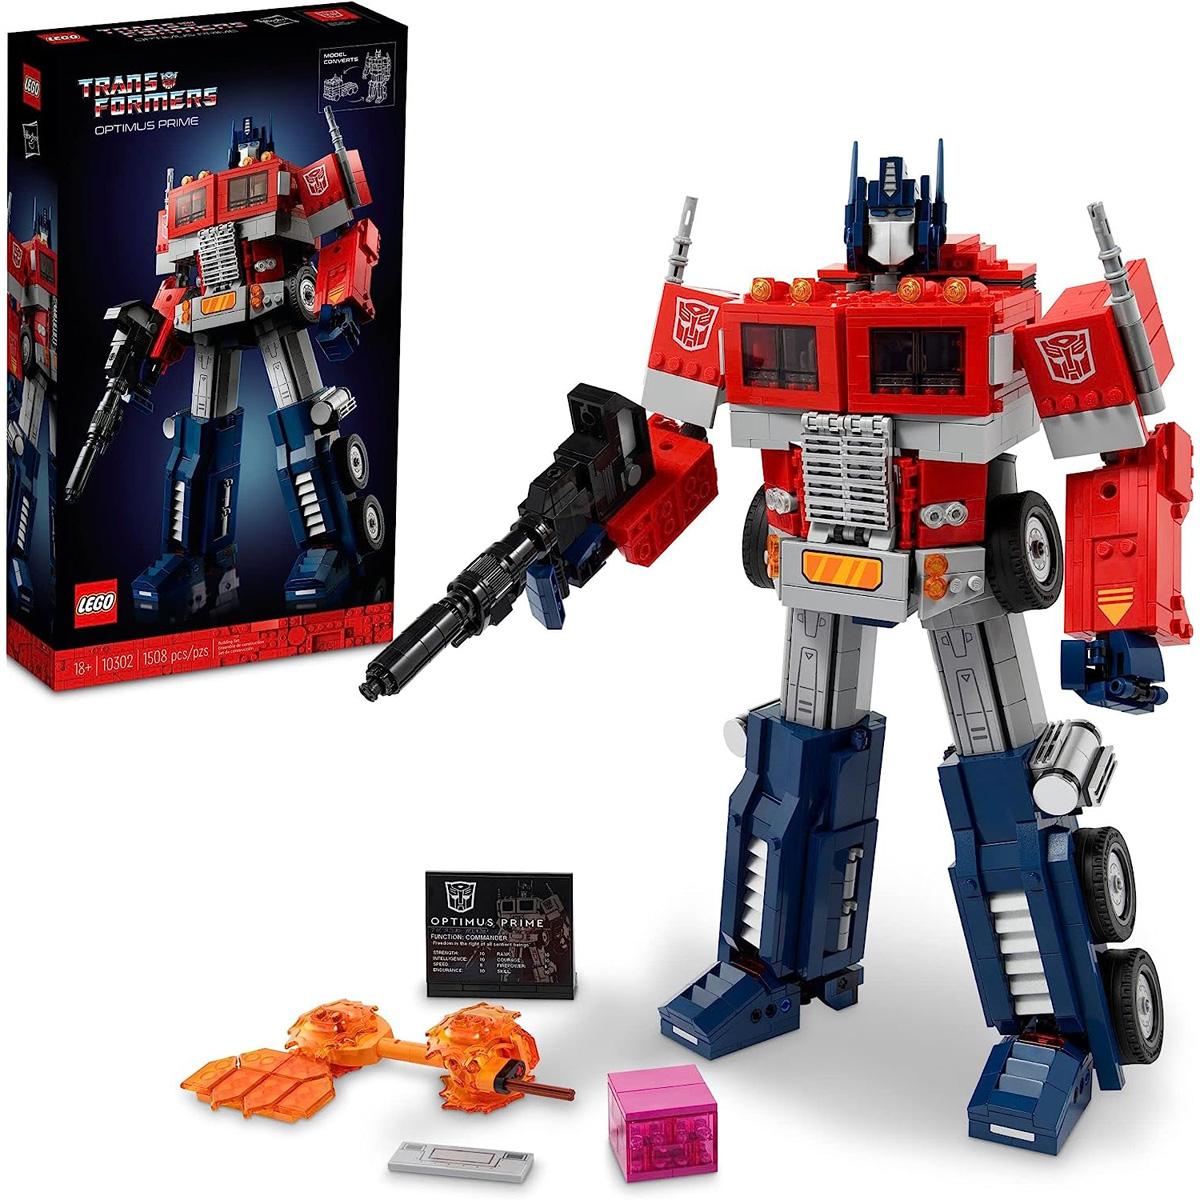 Lego Icons Transformers Optimus Prime Figure Building Set 10302 for $152.99 Shipped